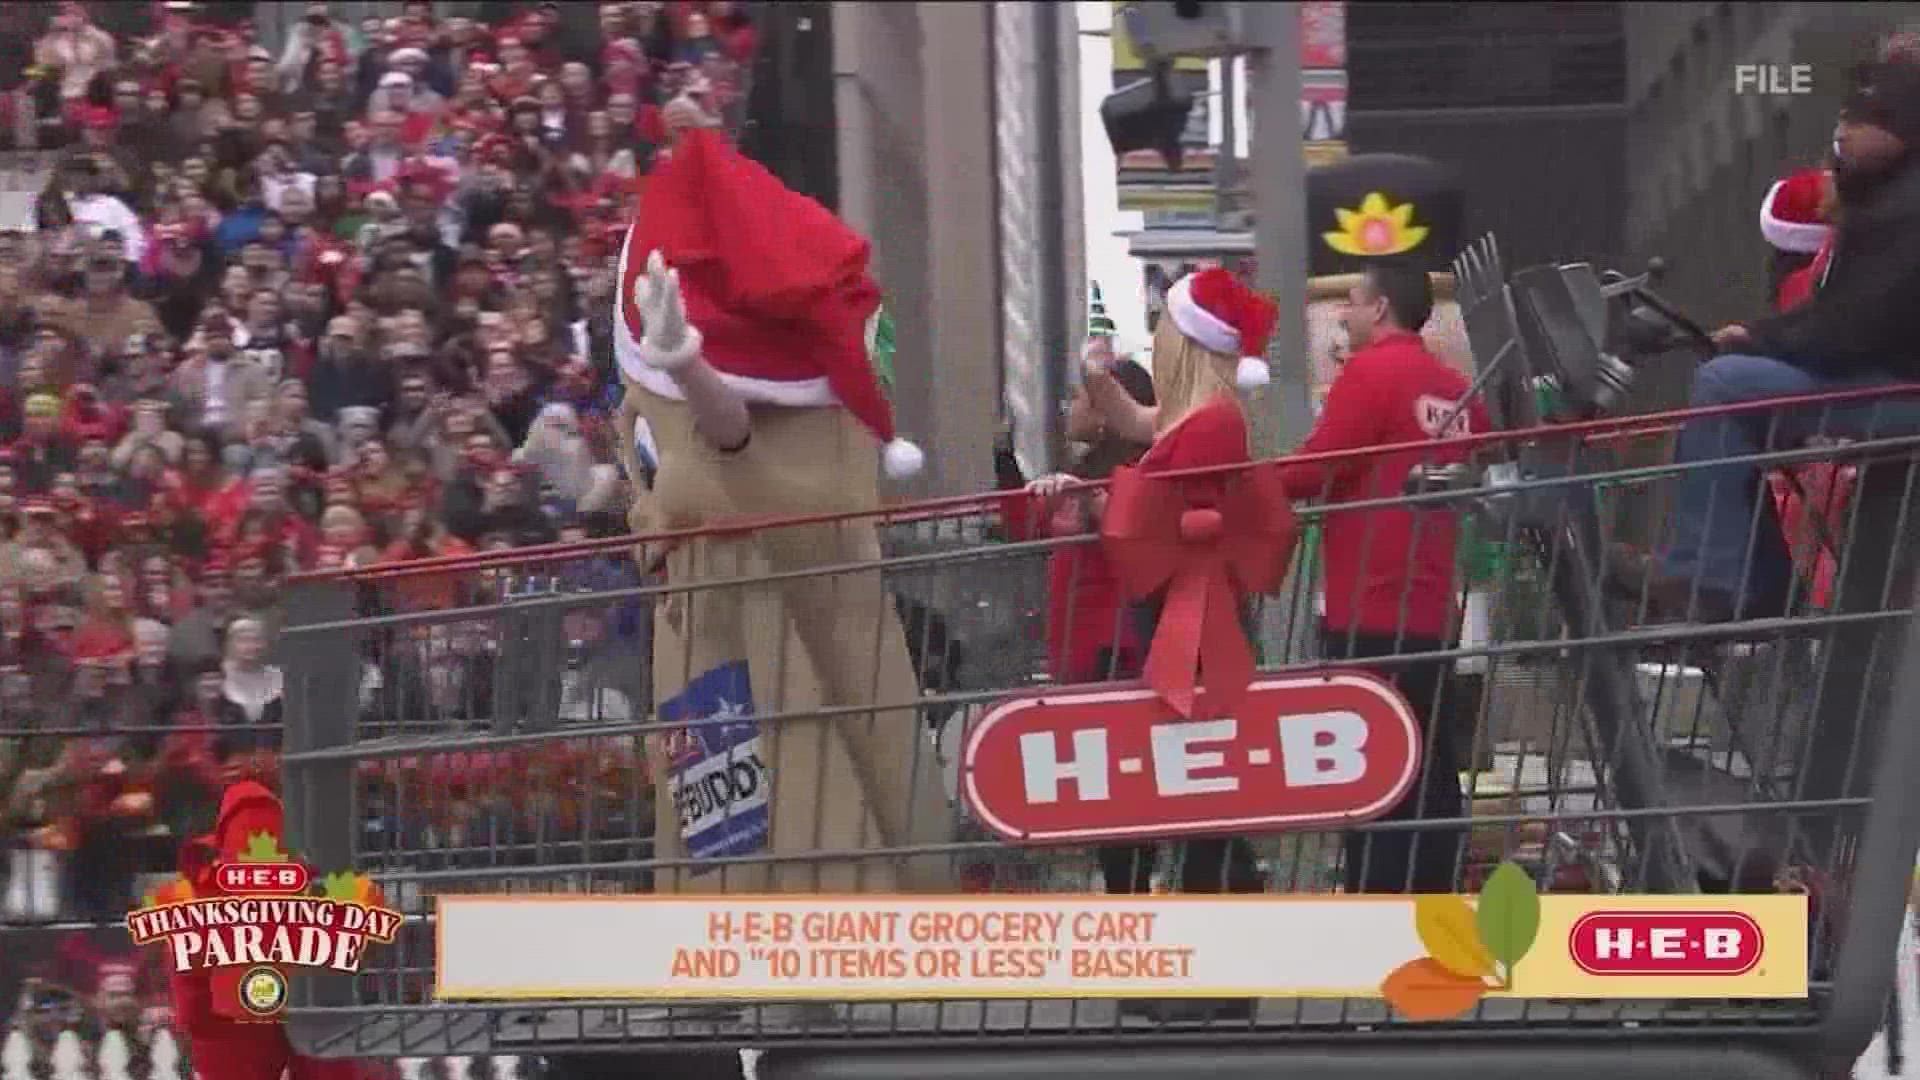 All systems are "go" for the 73rd annual H-E-B Thanksgiving Day Parade. This would be the city's first Thanksgiving Day Parade in three years.